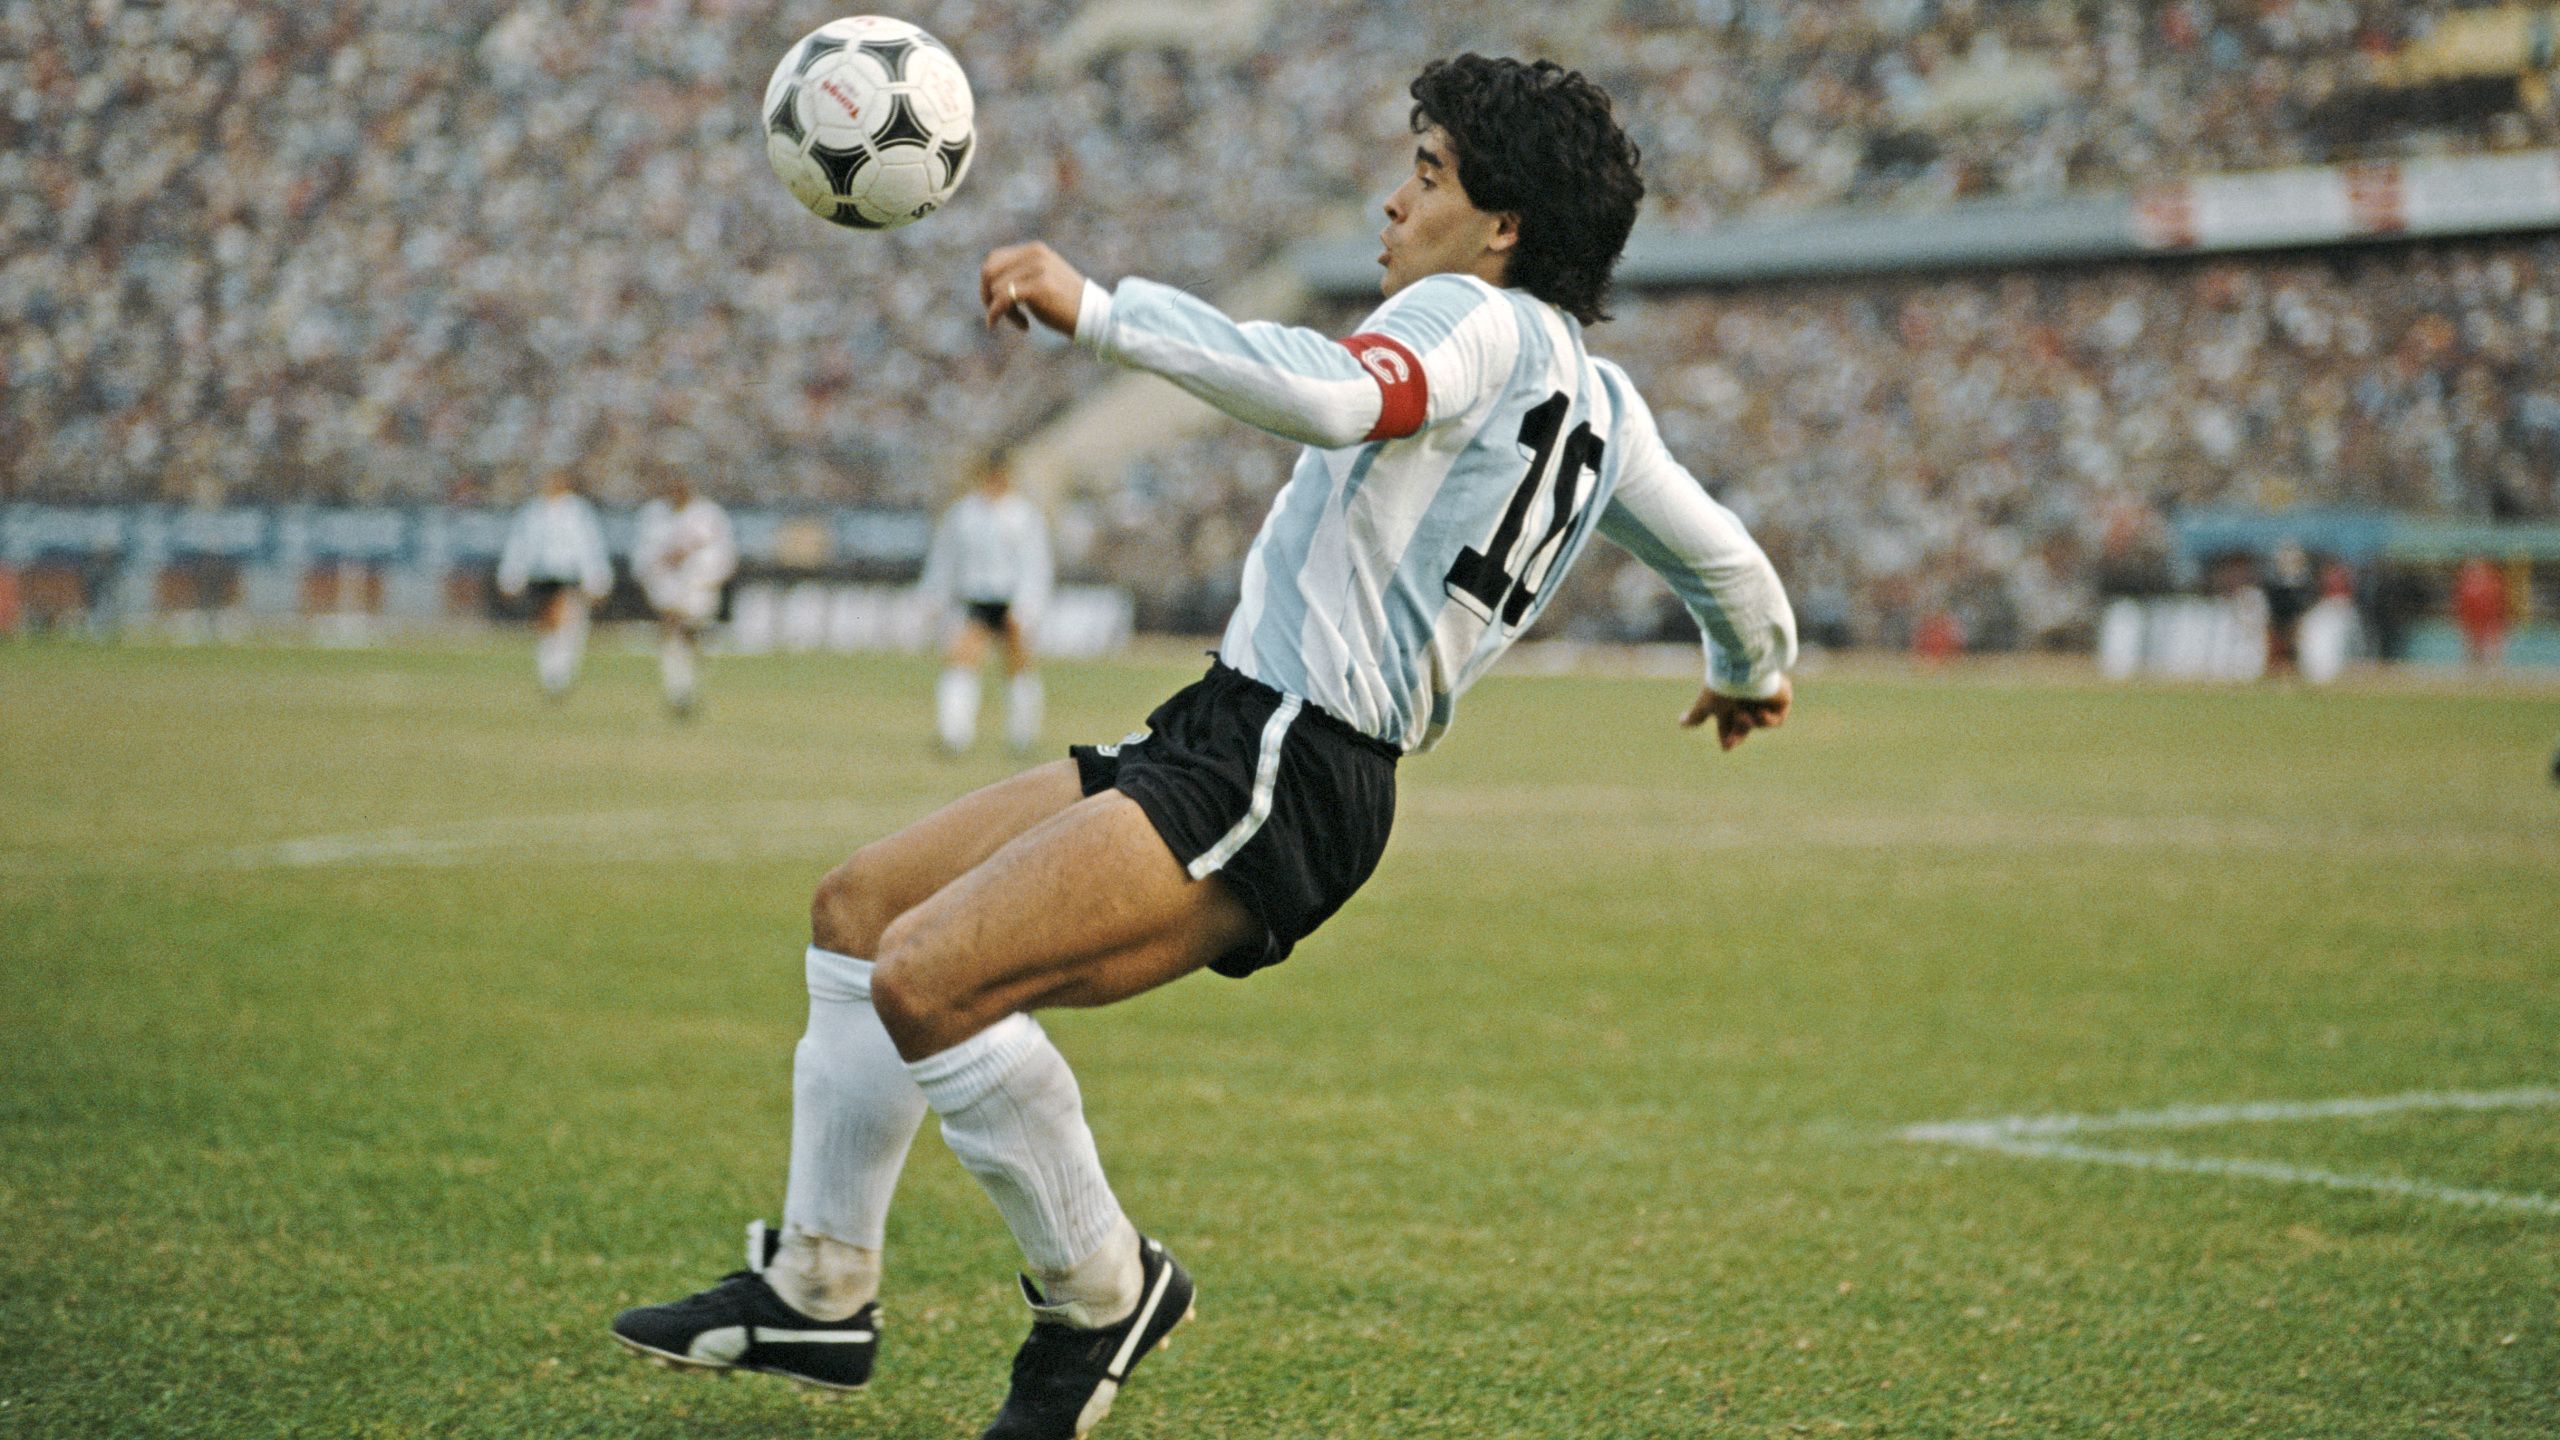 Diego Maradona, Argentina soccer legend who led country to 1986 World Cup, dies at 60